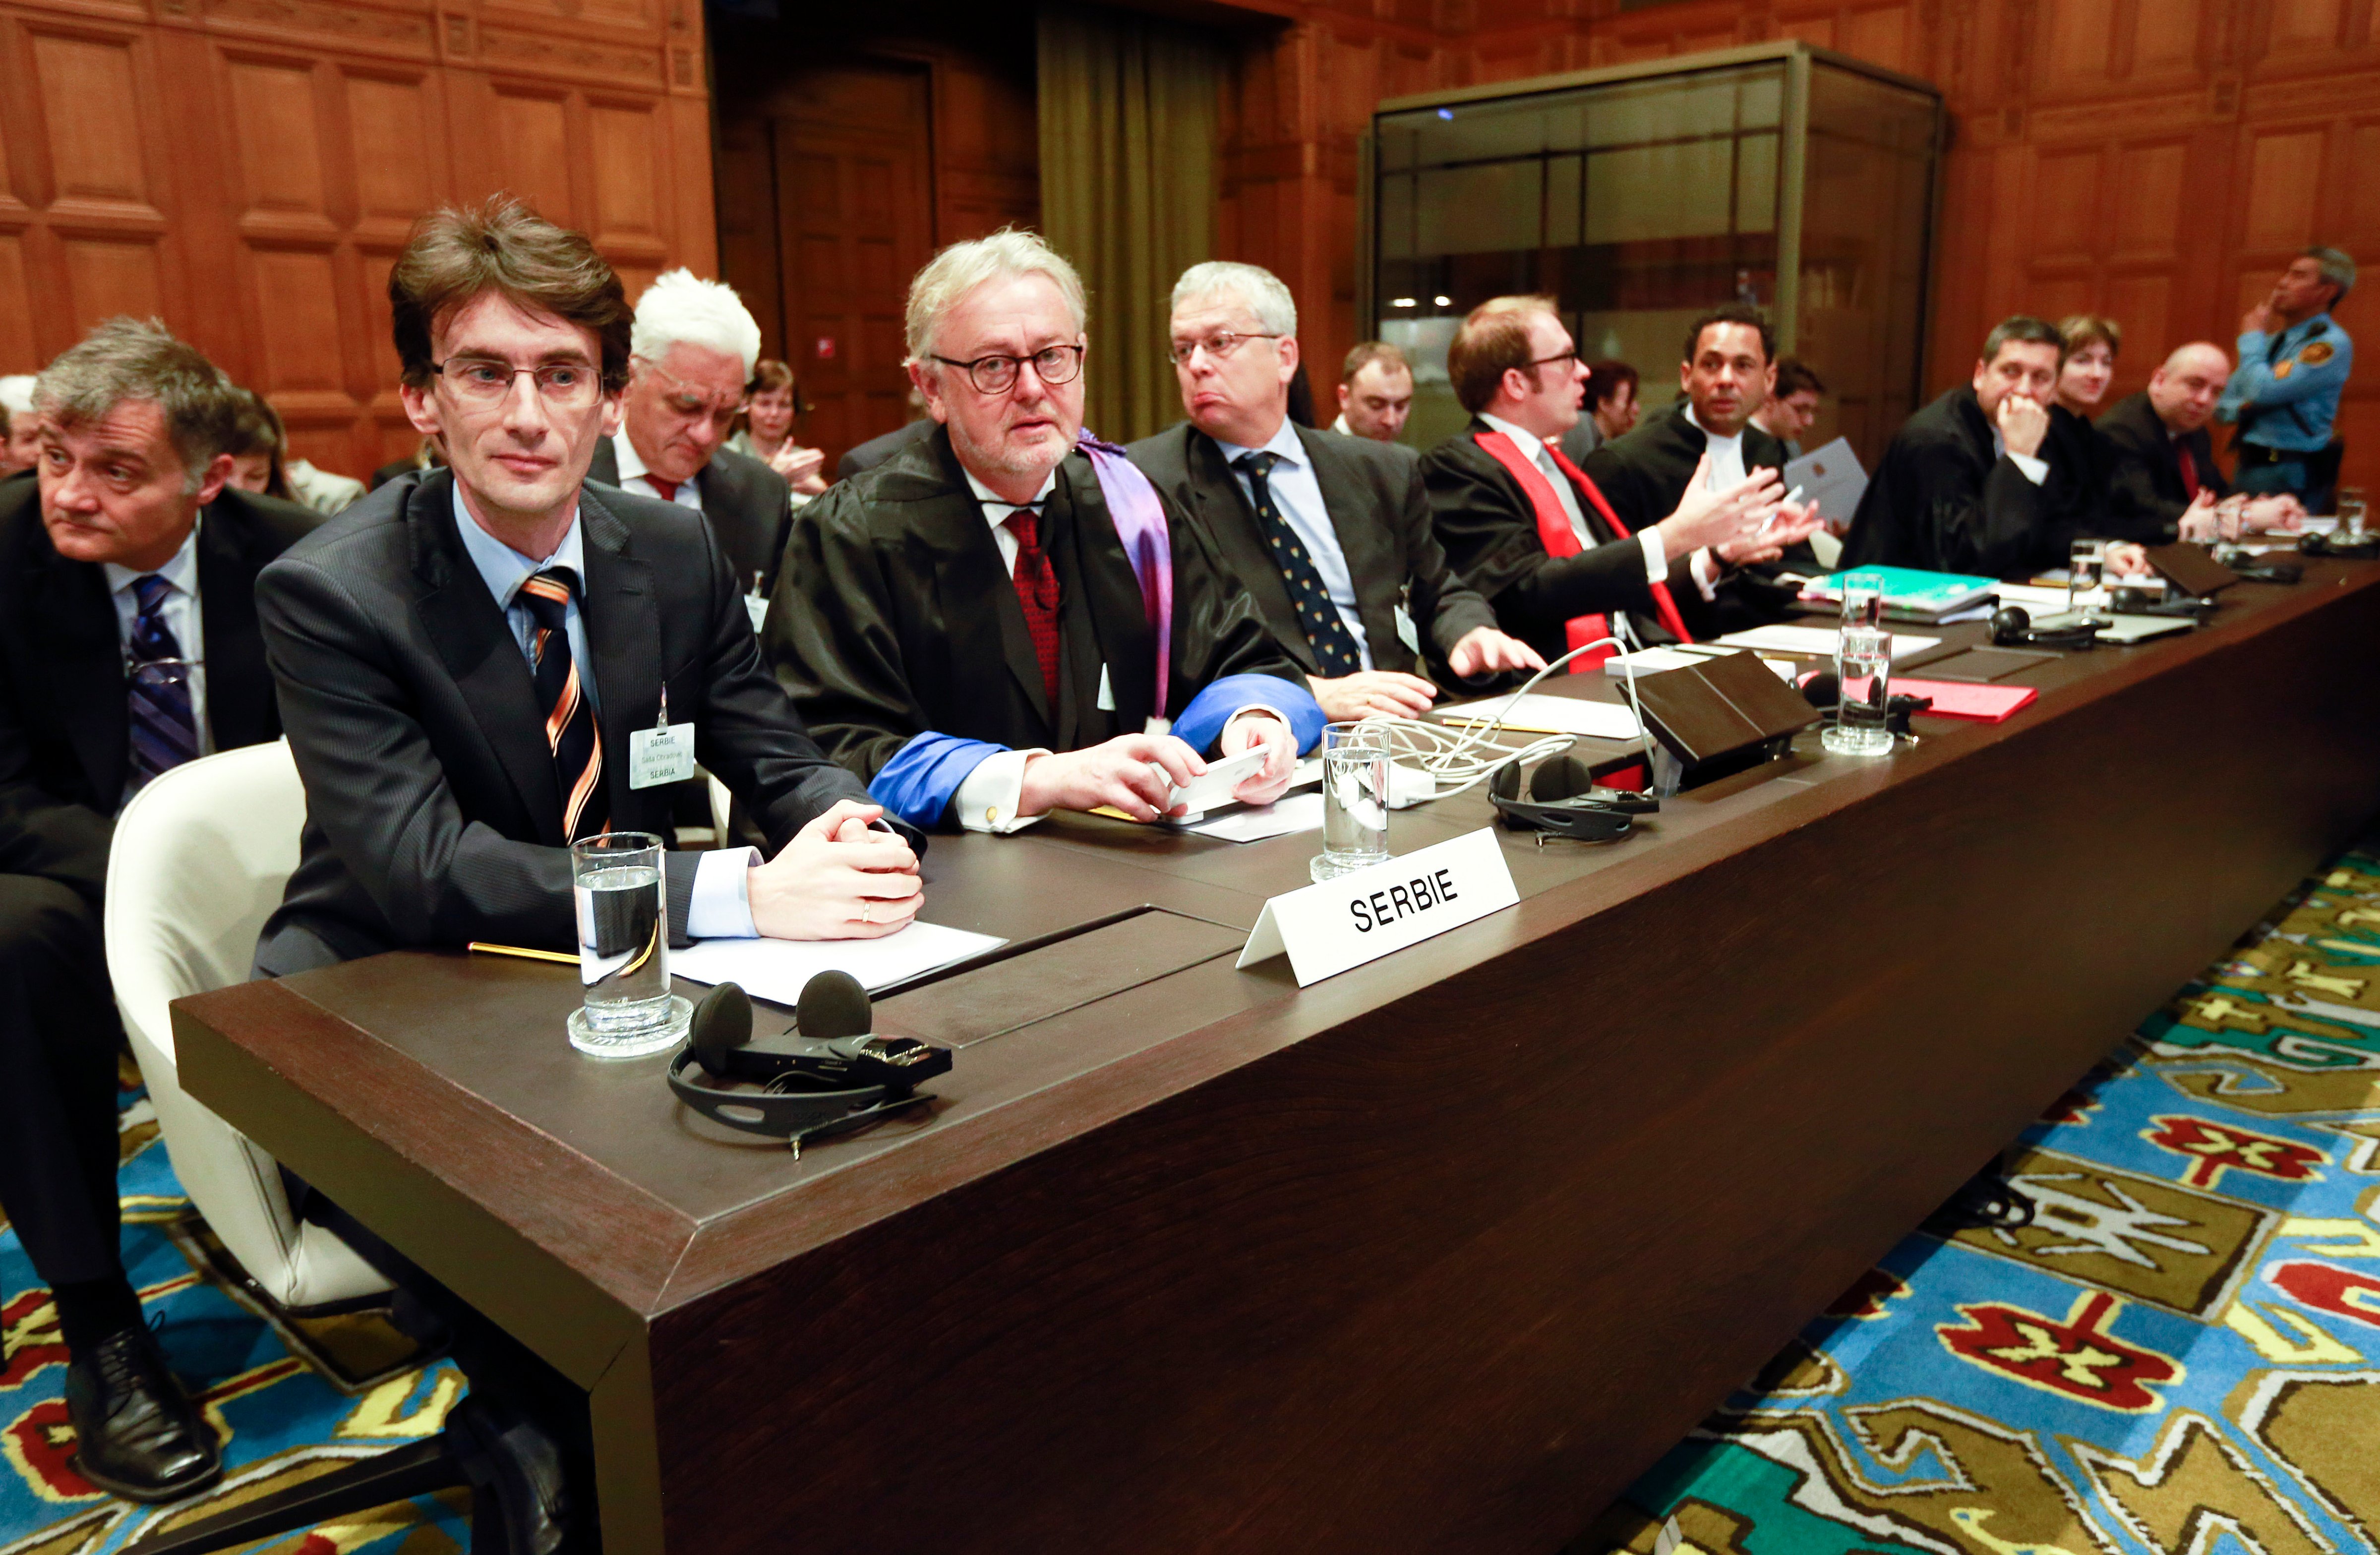 Members of the Serbian delegation, from left: Sasa Orbadovic, William Schabas, Andreas Zimmermann, Christian Tams and Wayne Jordash await the start of public hearings at the International Court of Justice (ICJ) in The Hague,  Netherlands, Monday, March 3, 2014. (Jiri Buller&mdash;AP)